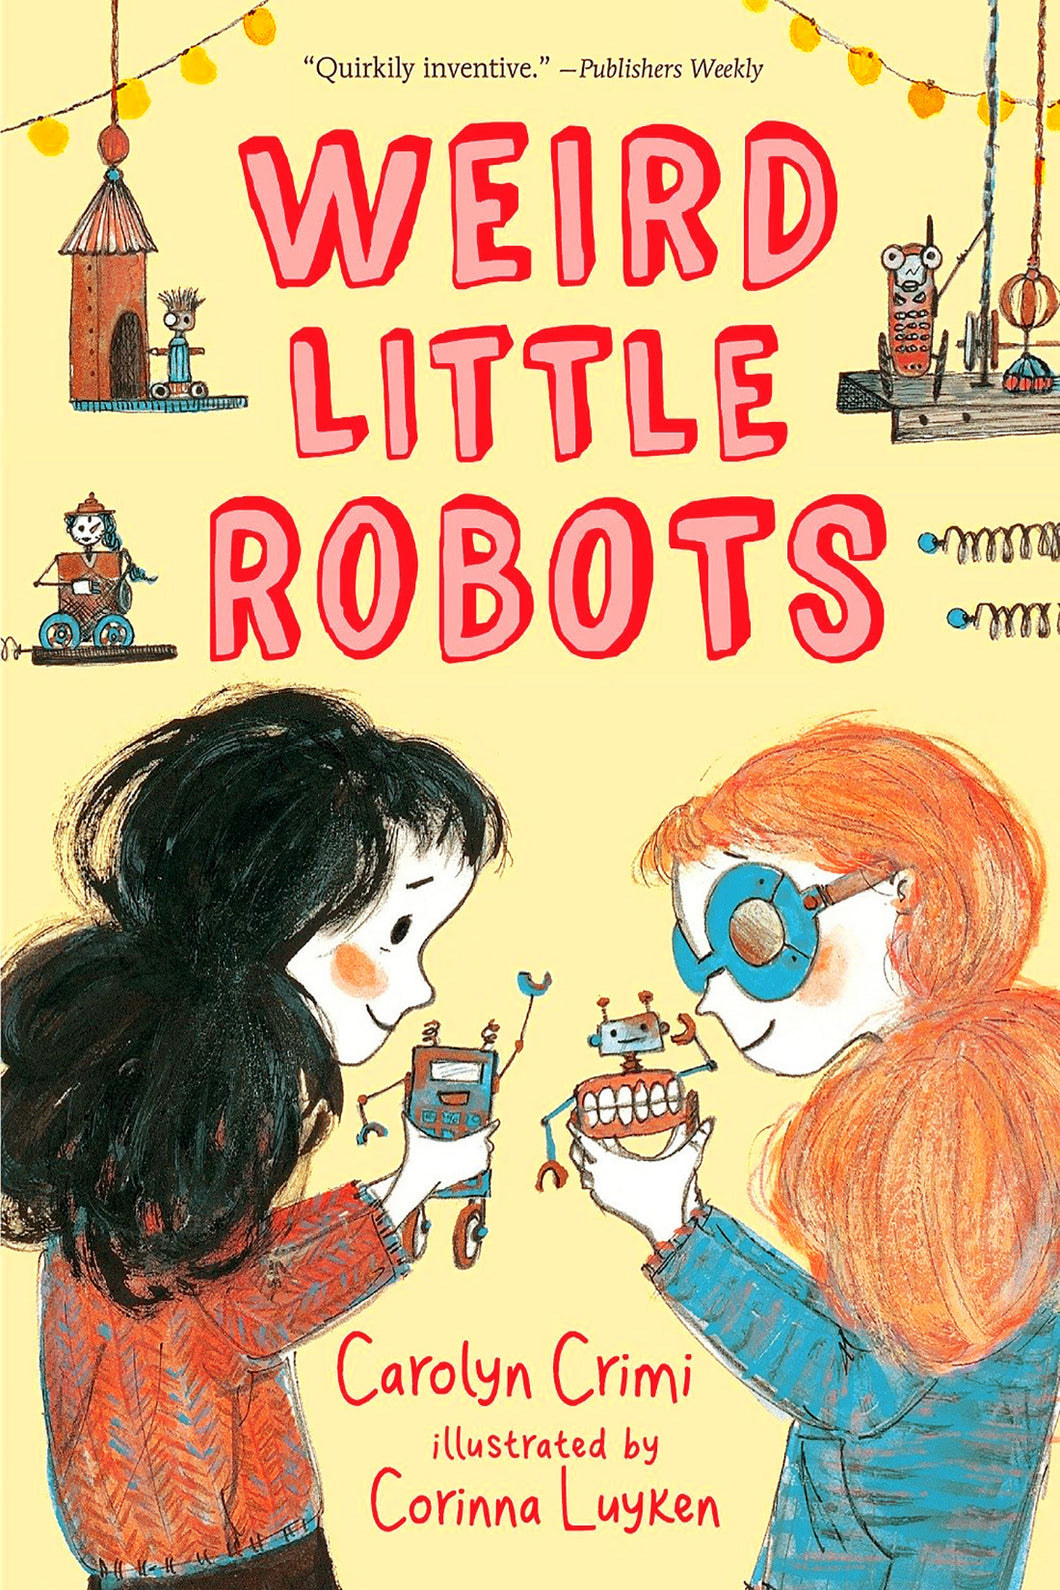 Weird Little Robots by Carolyn Crimi / Hardcover or Paperback - NEW BOOK OR BOOK BUNDLE